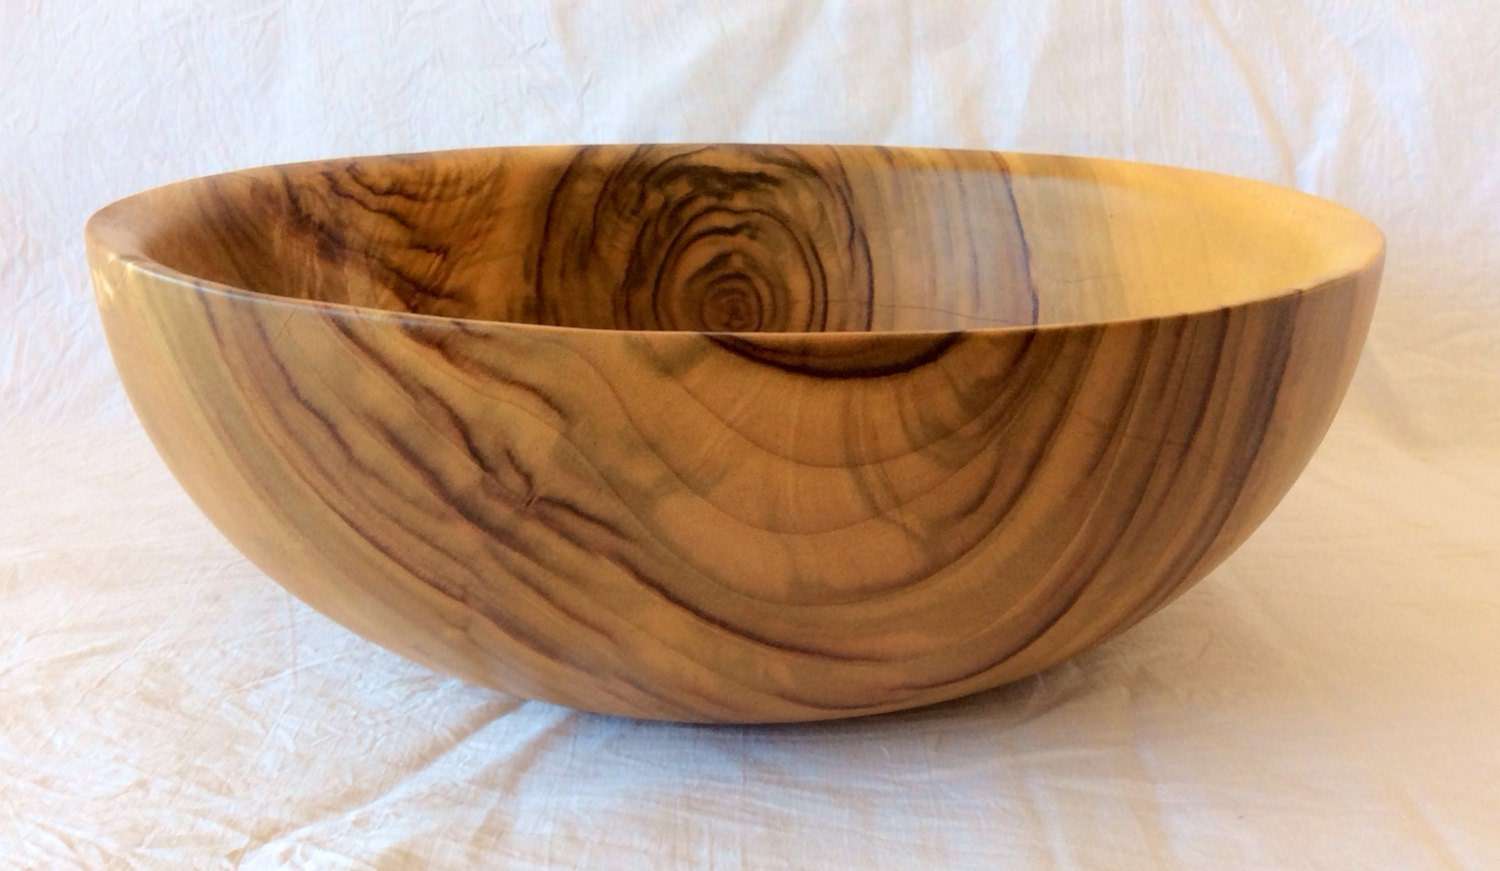 Extra Large wooden salad bowl. Quality craftsmanship to last a